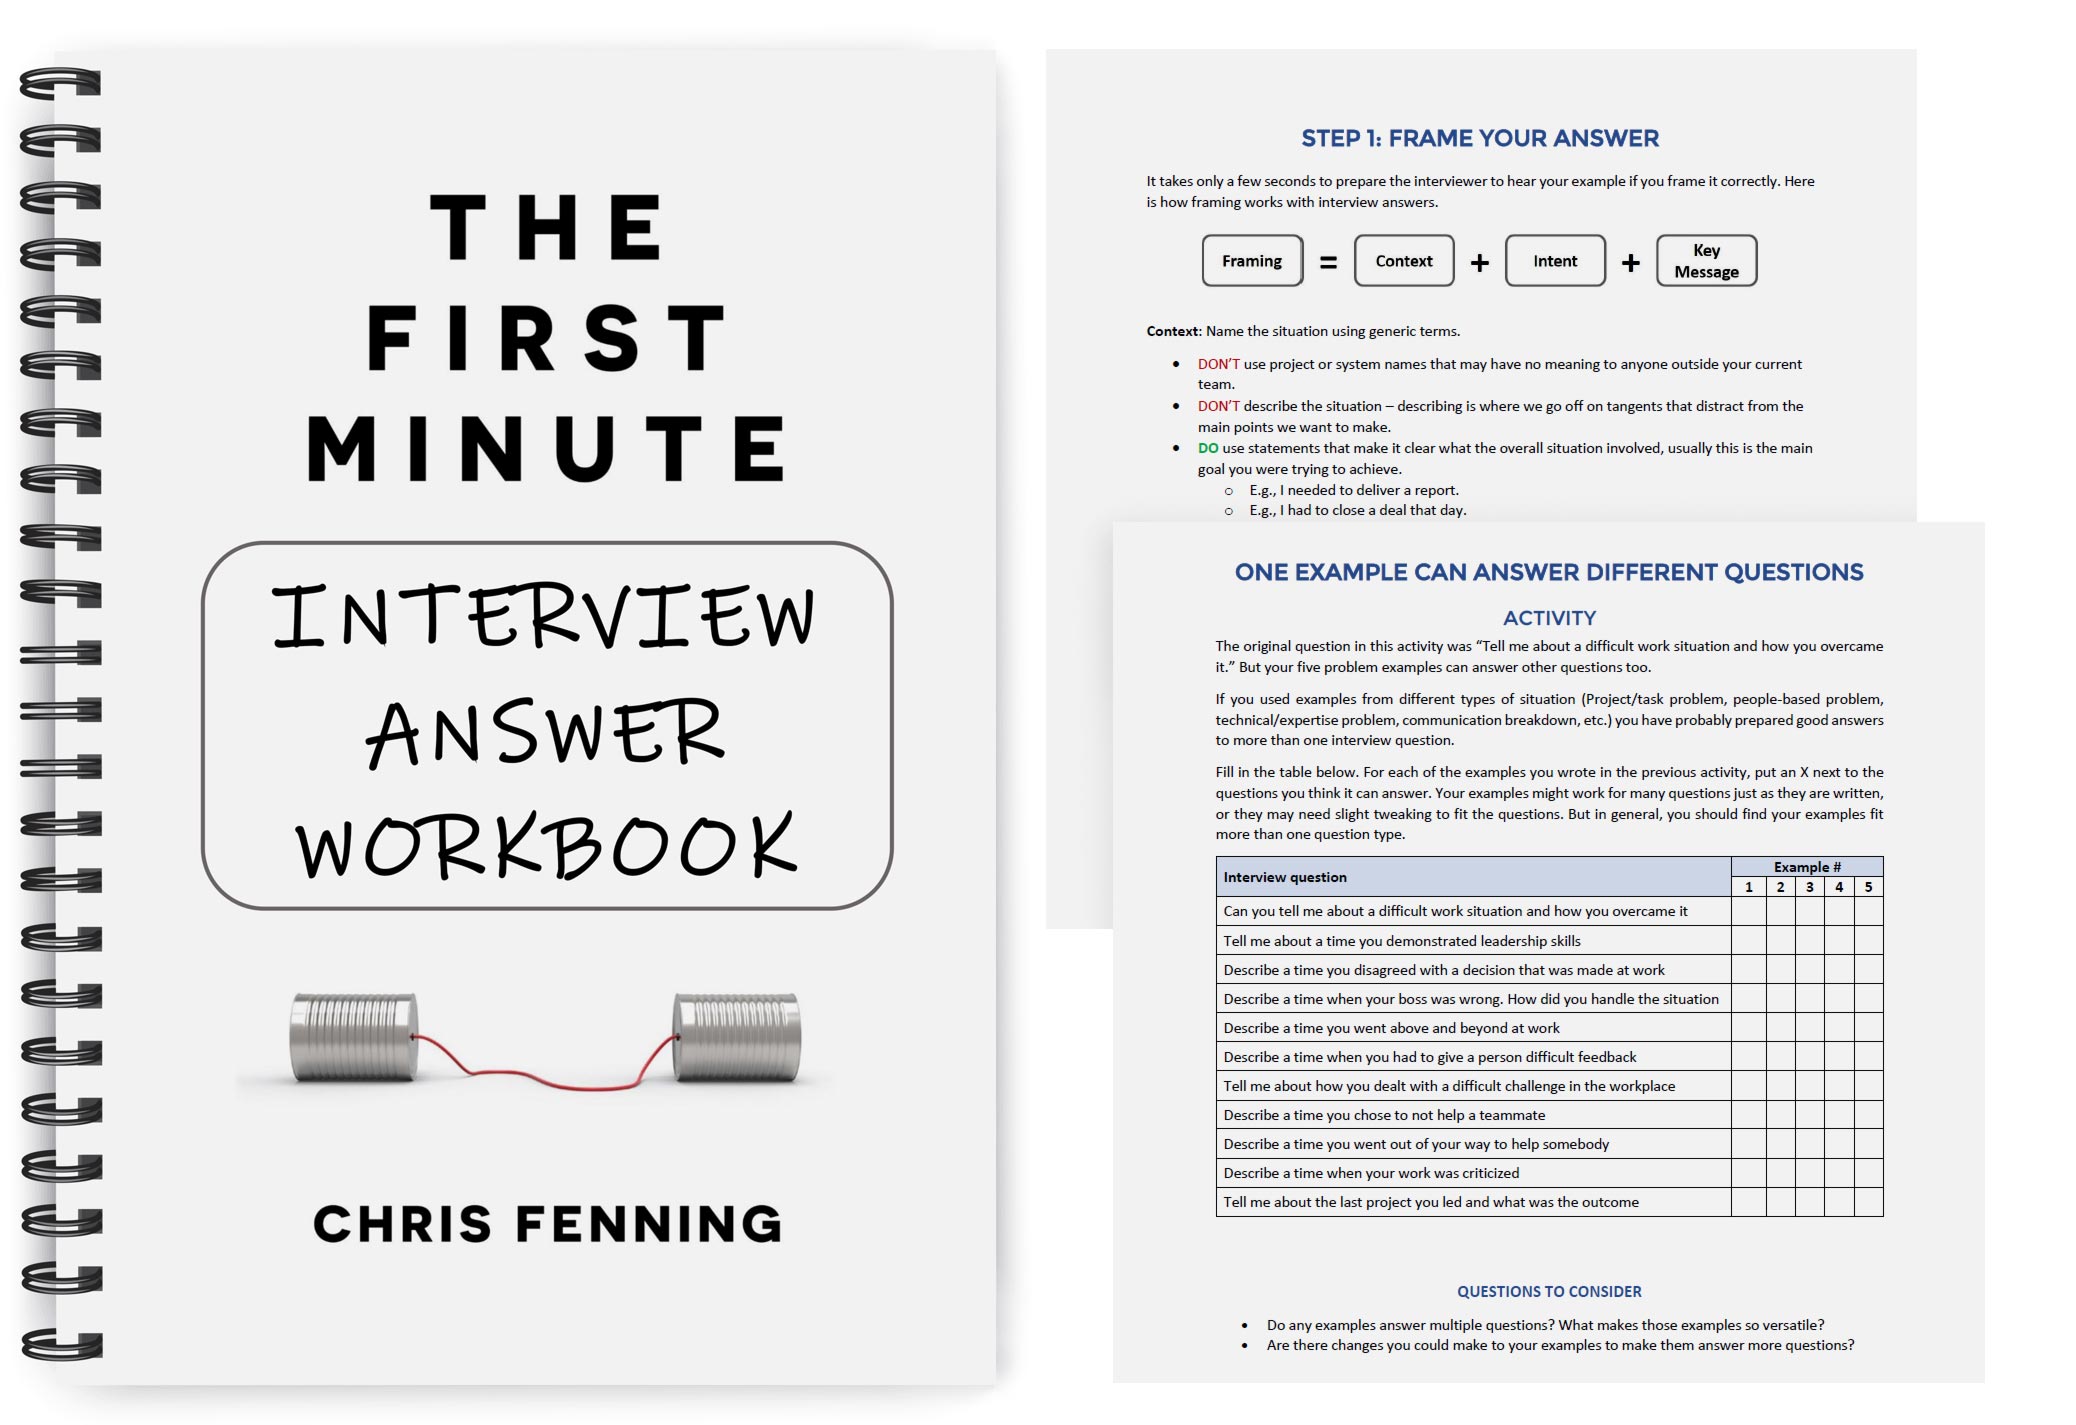 The First Minute Interview Answer Workbook by Chris Fenning